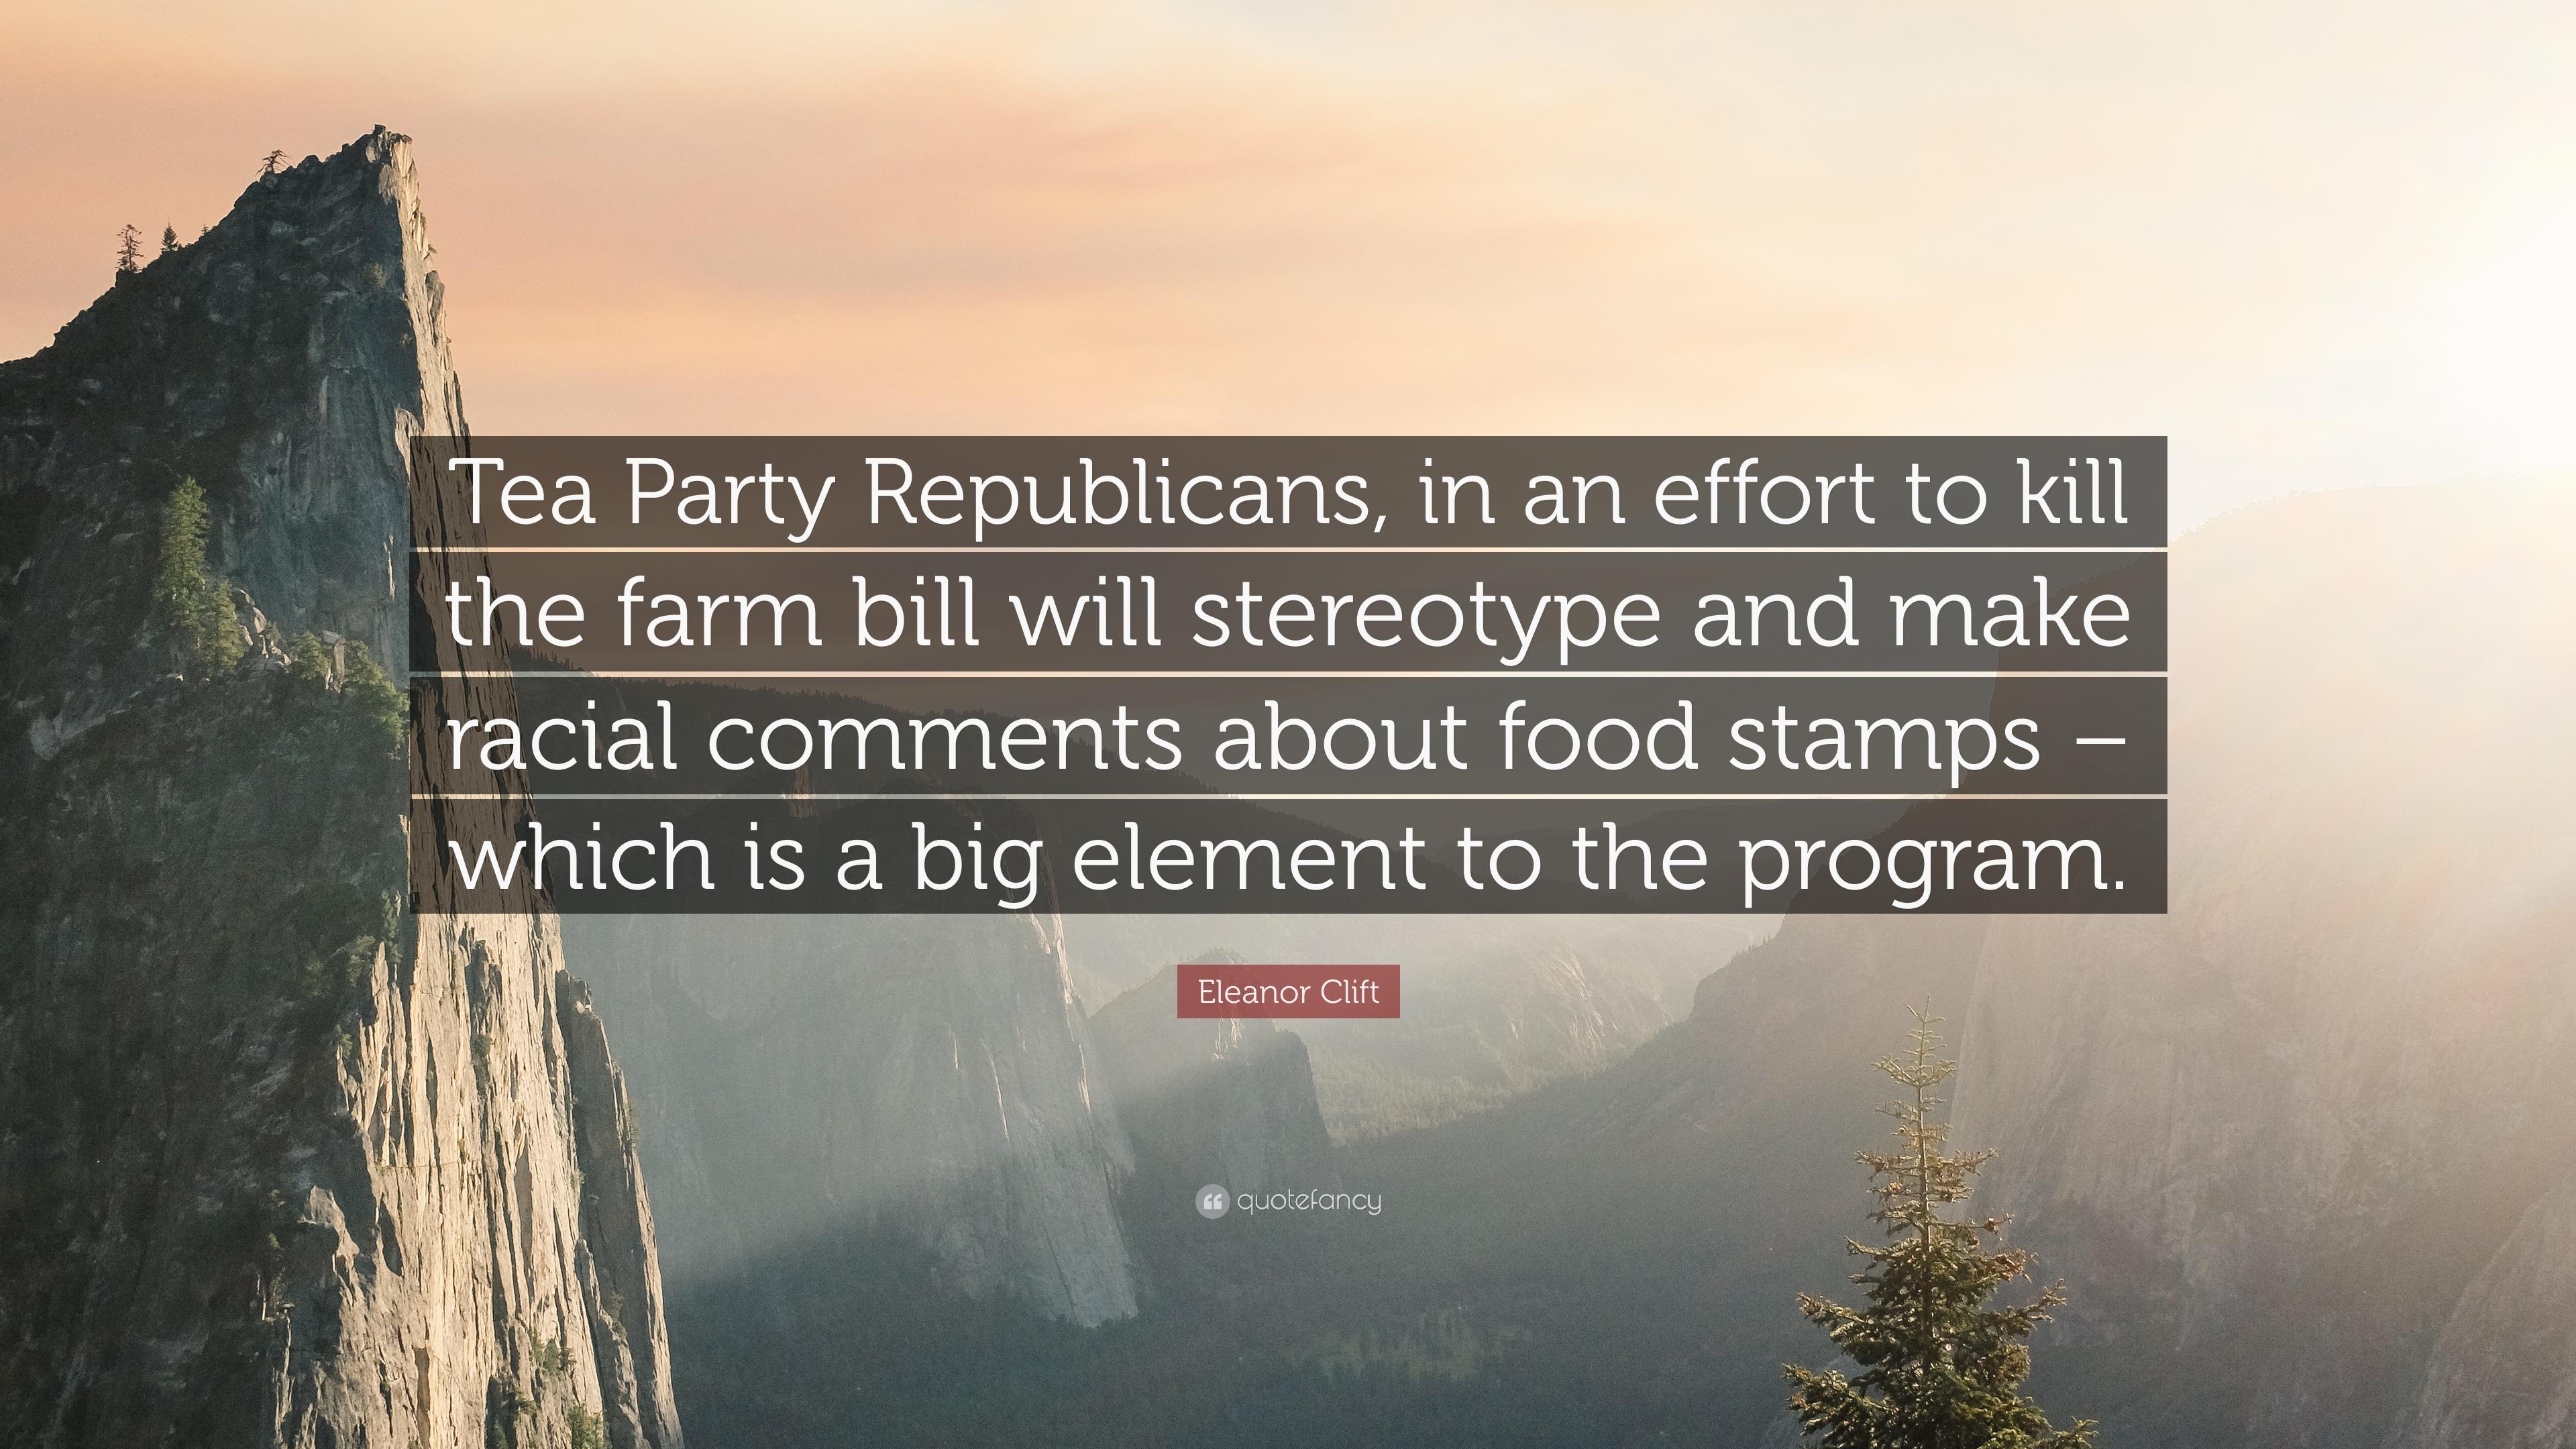 Eleanor Clift Quote: “Tea Party Republicans, in an effort to